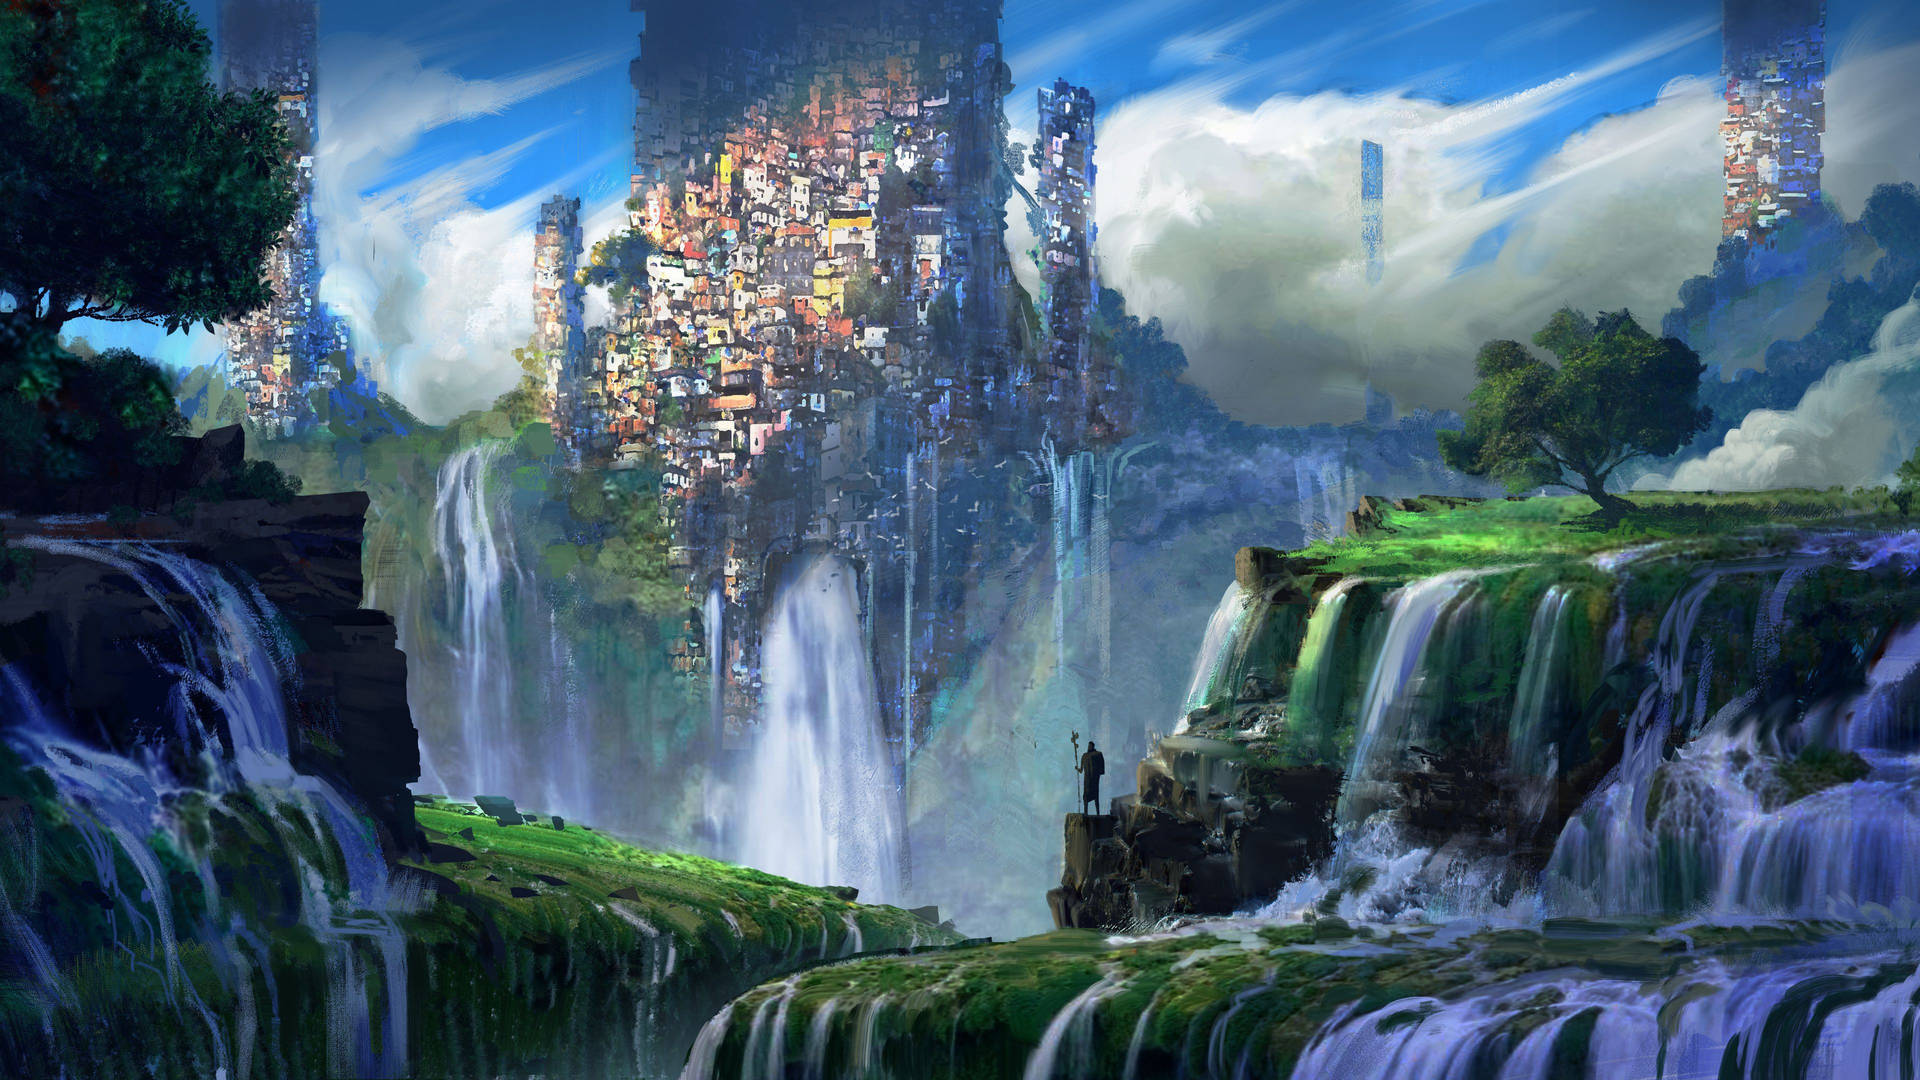 Waterfall And City Slums Wallpaper